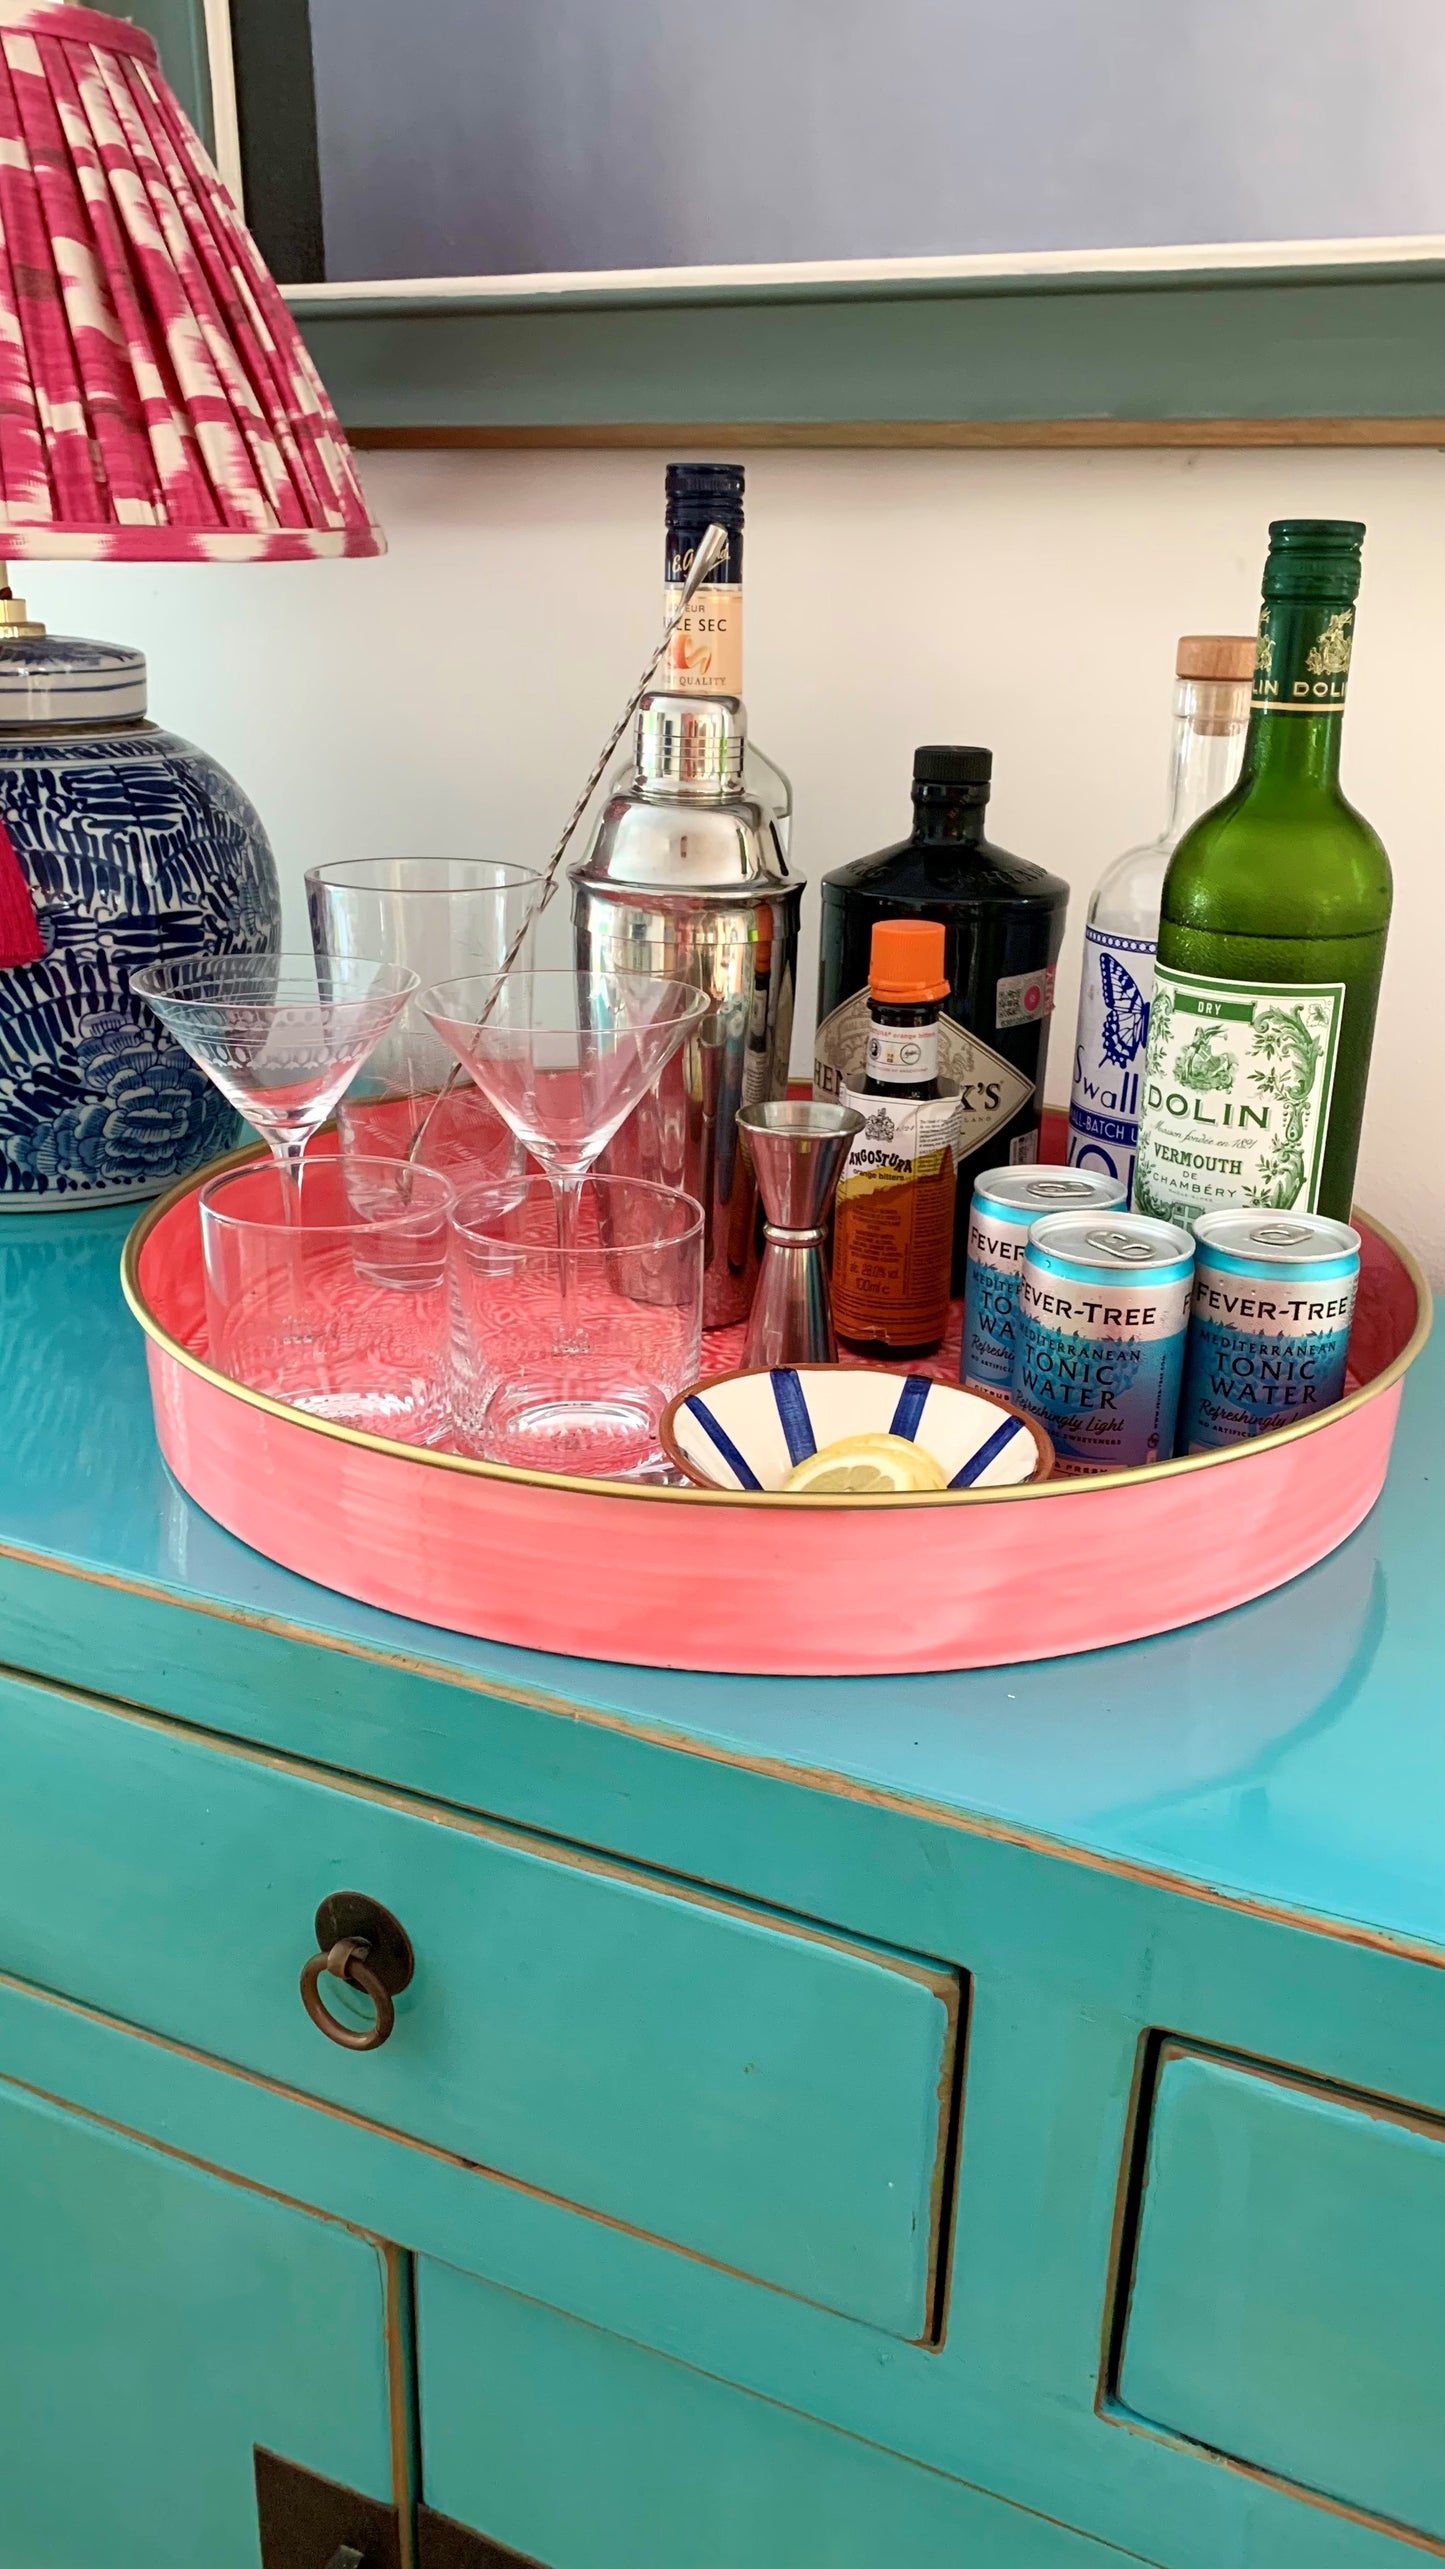 A bright pink tray being used as a drinks tray on a turquoise sideboard.